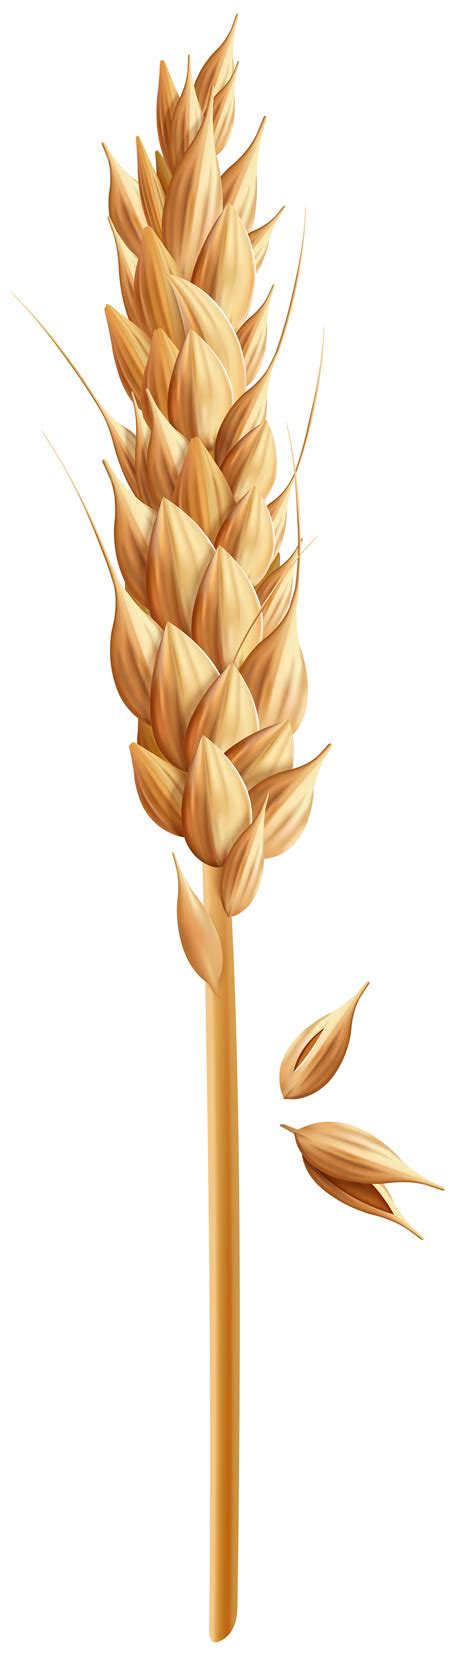 Wheat clipart grain, Wheat grain Transparent FREE for download on png image